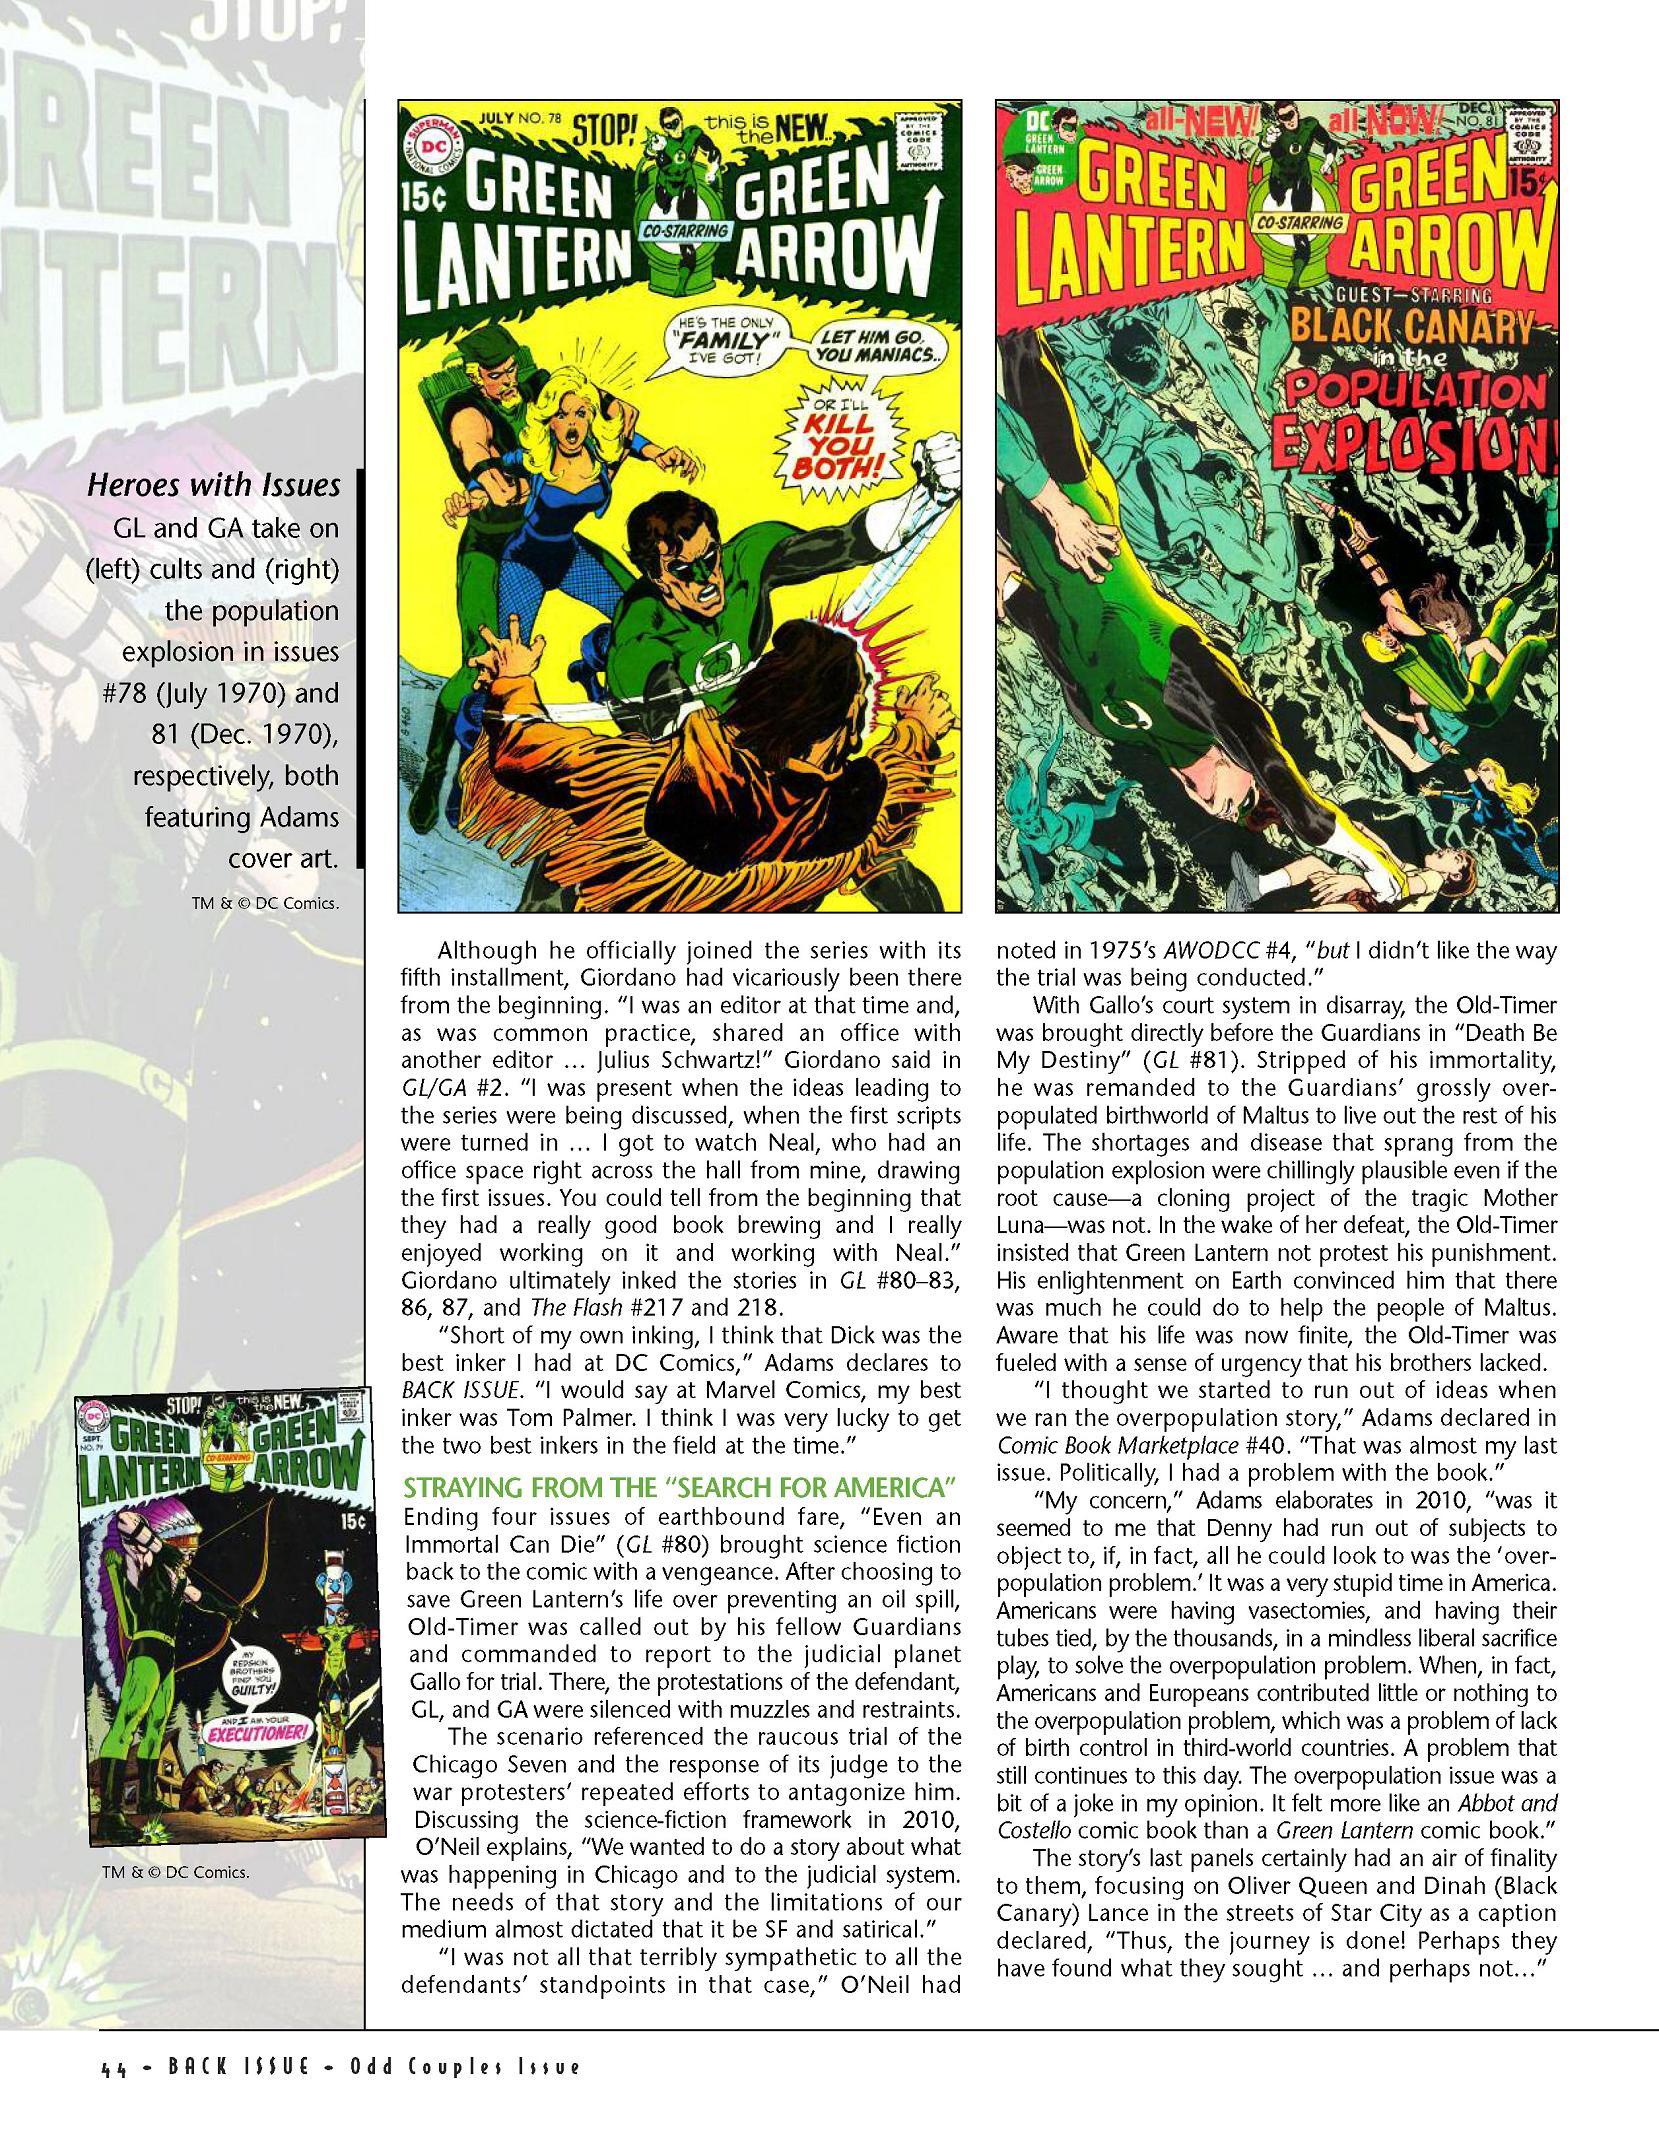 Read online Back Issue comic -  Issue #45 - 46